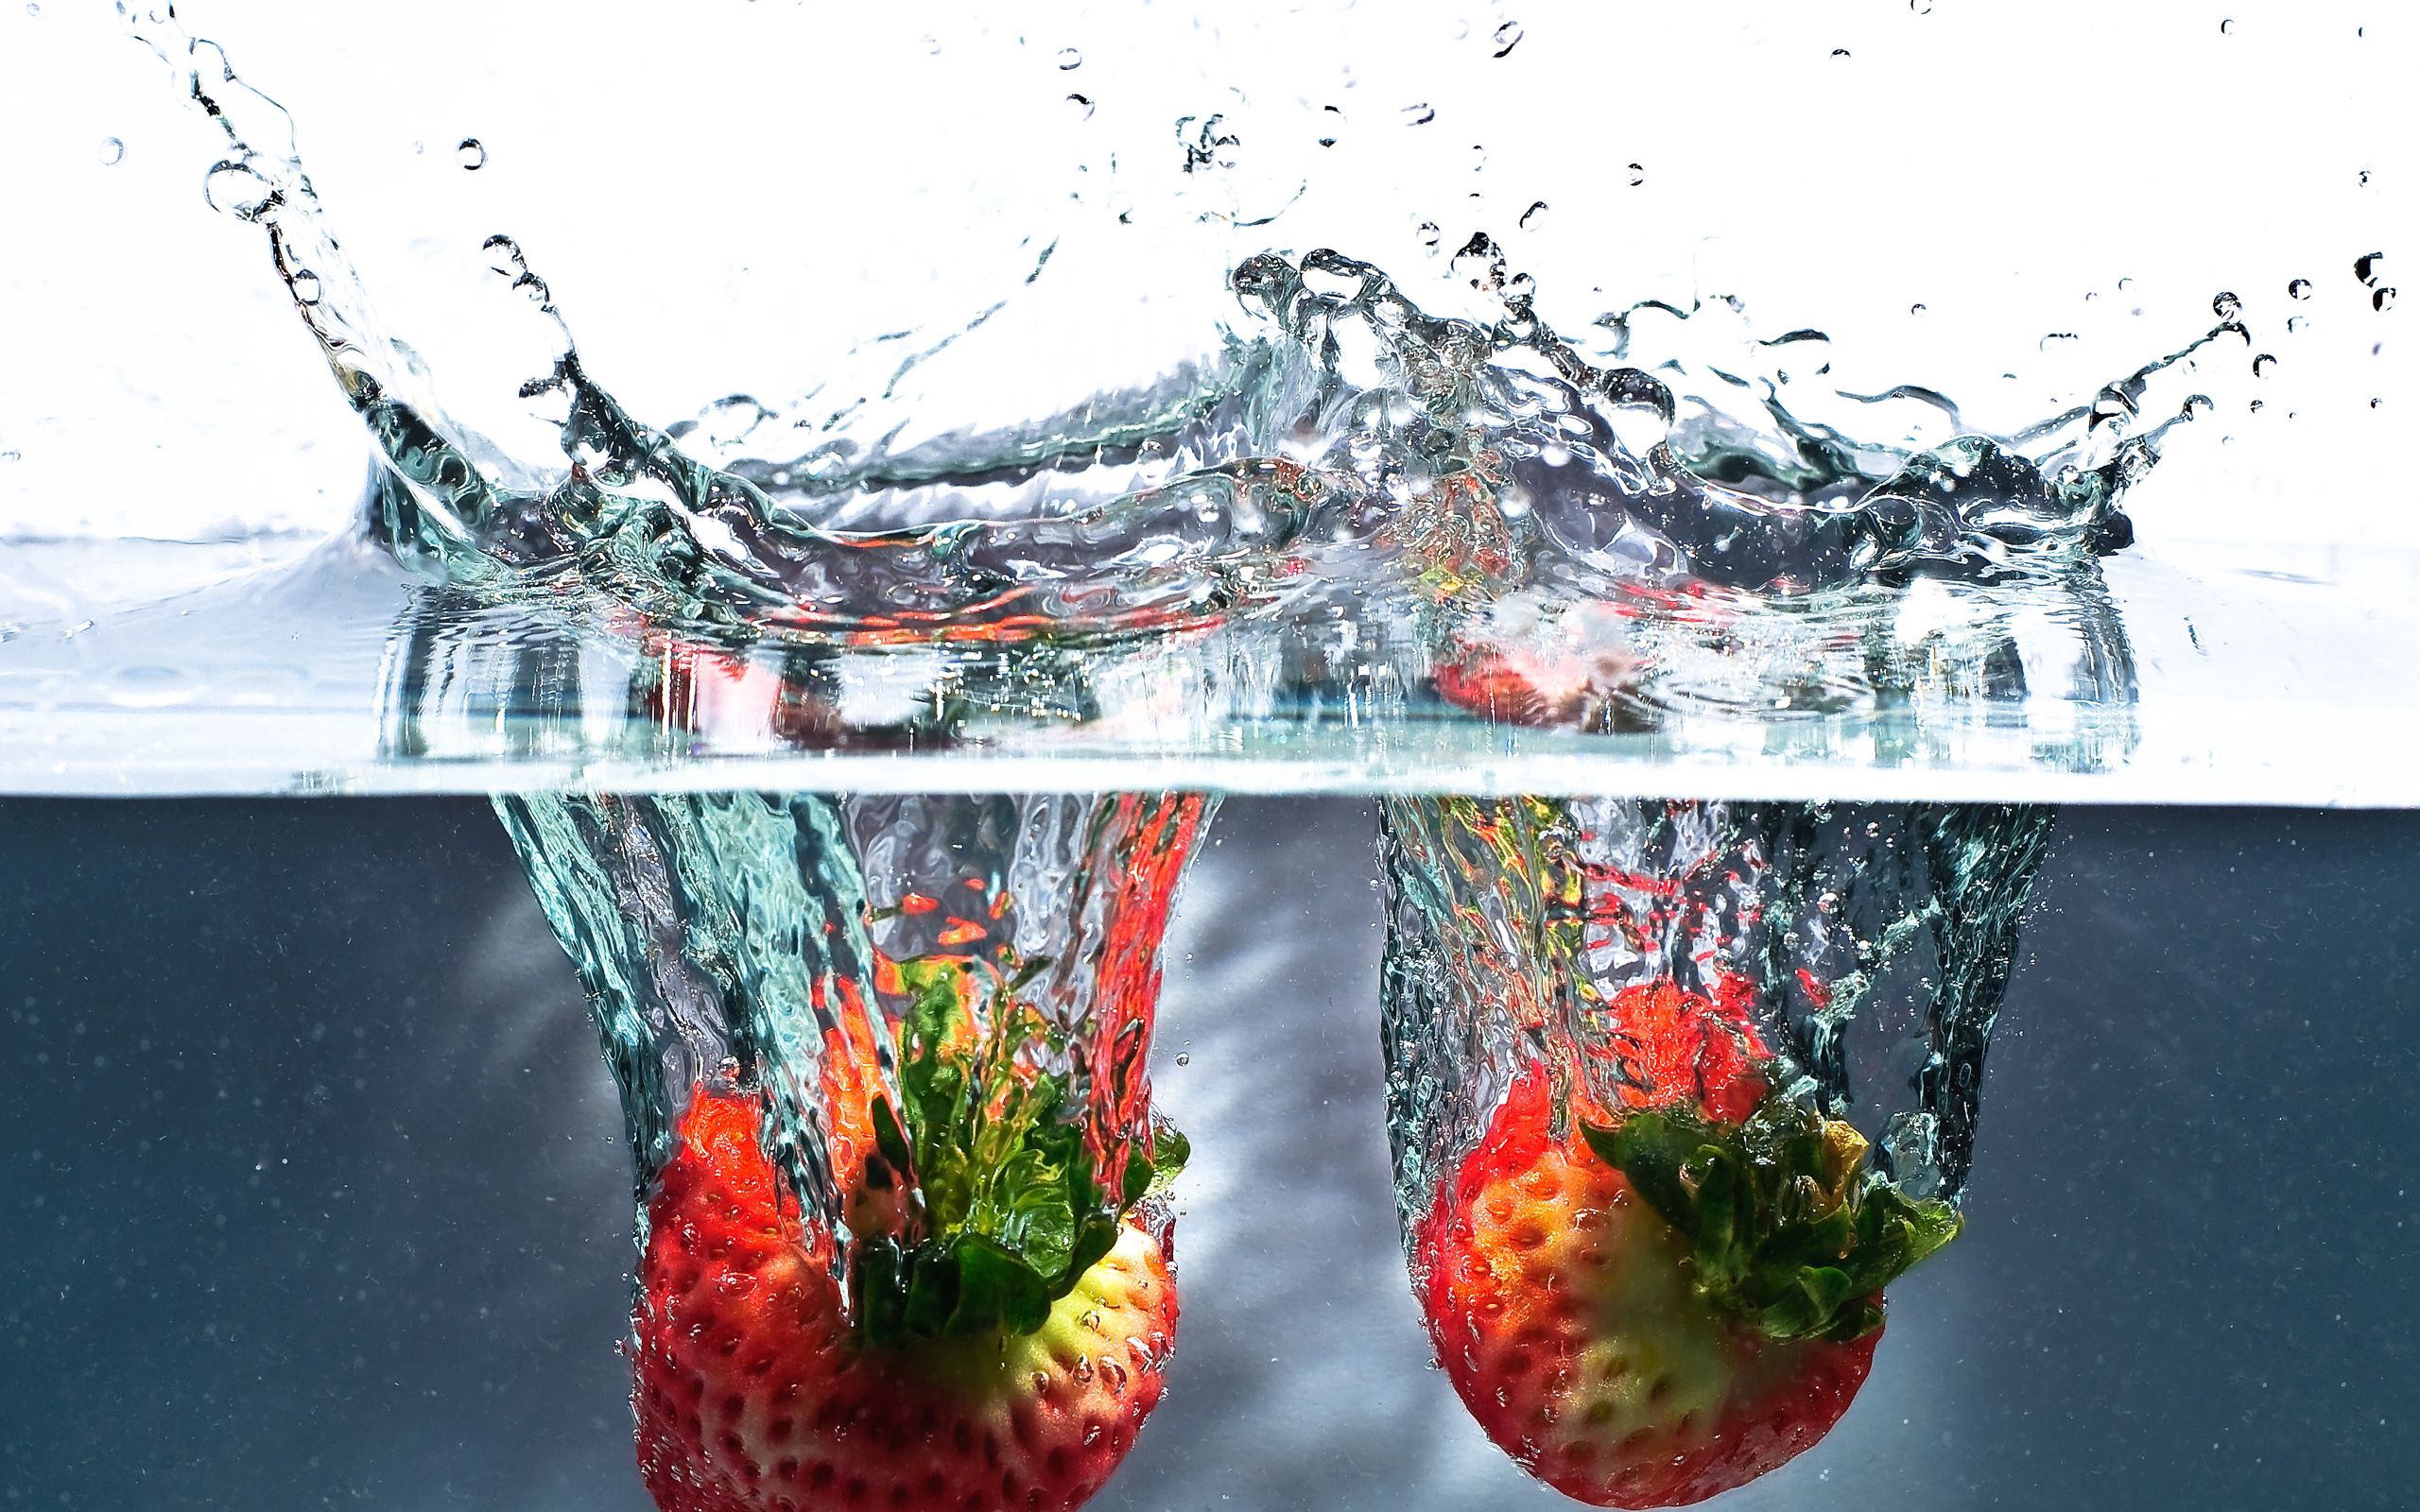 127984 download wallpaper food, water, strawberry, spray, splash screensavers and pictures for free